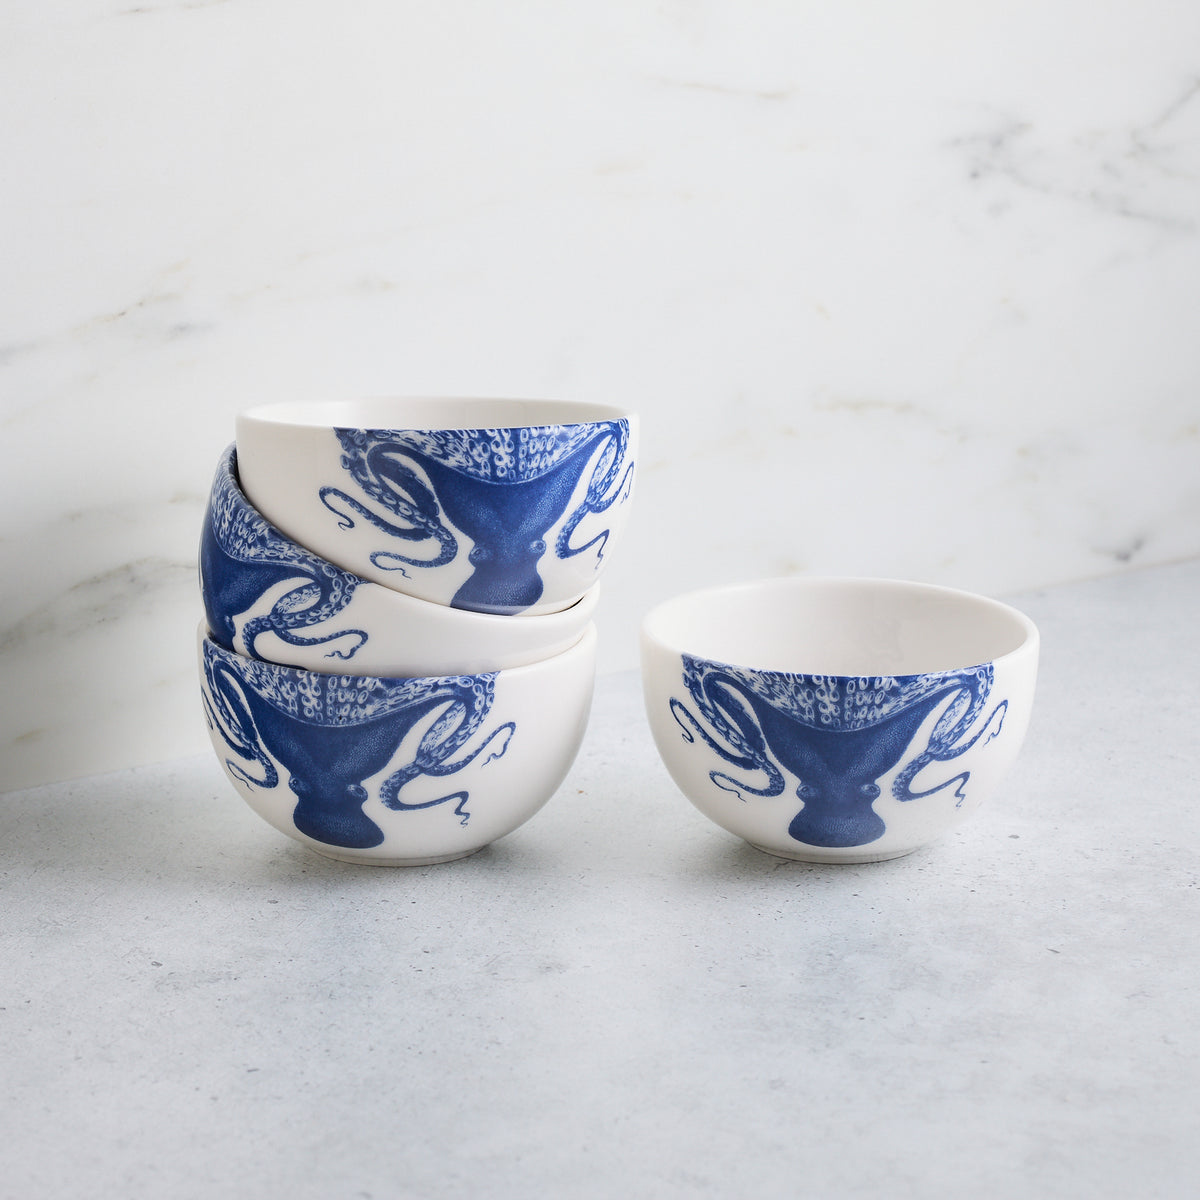 Three white Lucy Snack Bowls with blue Lucy the octopus designs by Caskata Artisanal Home are stacked, and one matching small bowl is placed beside the stack on a light gray surface, against a marble backdrop.